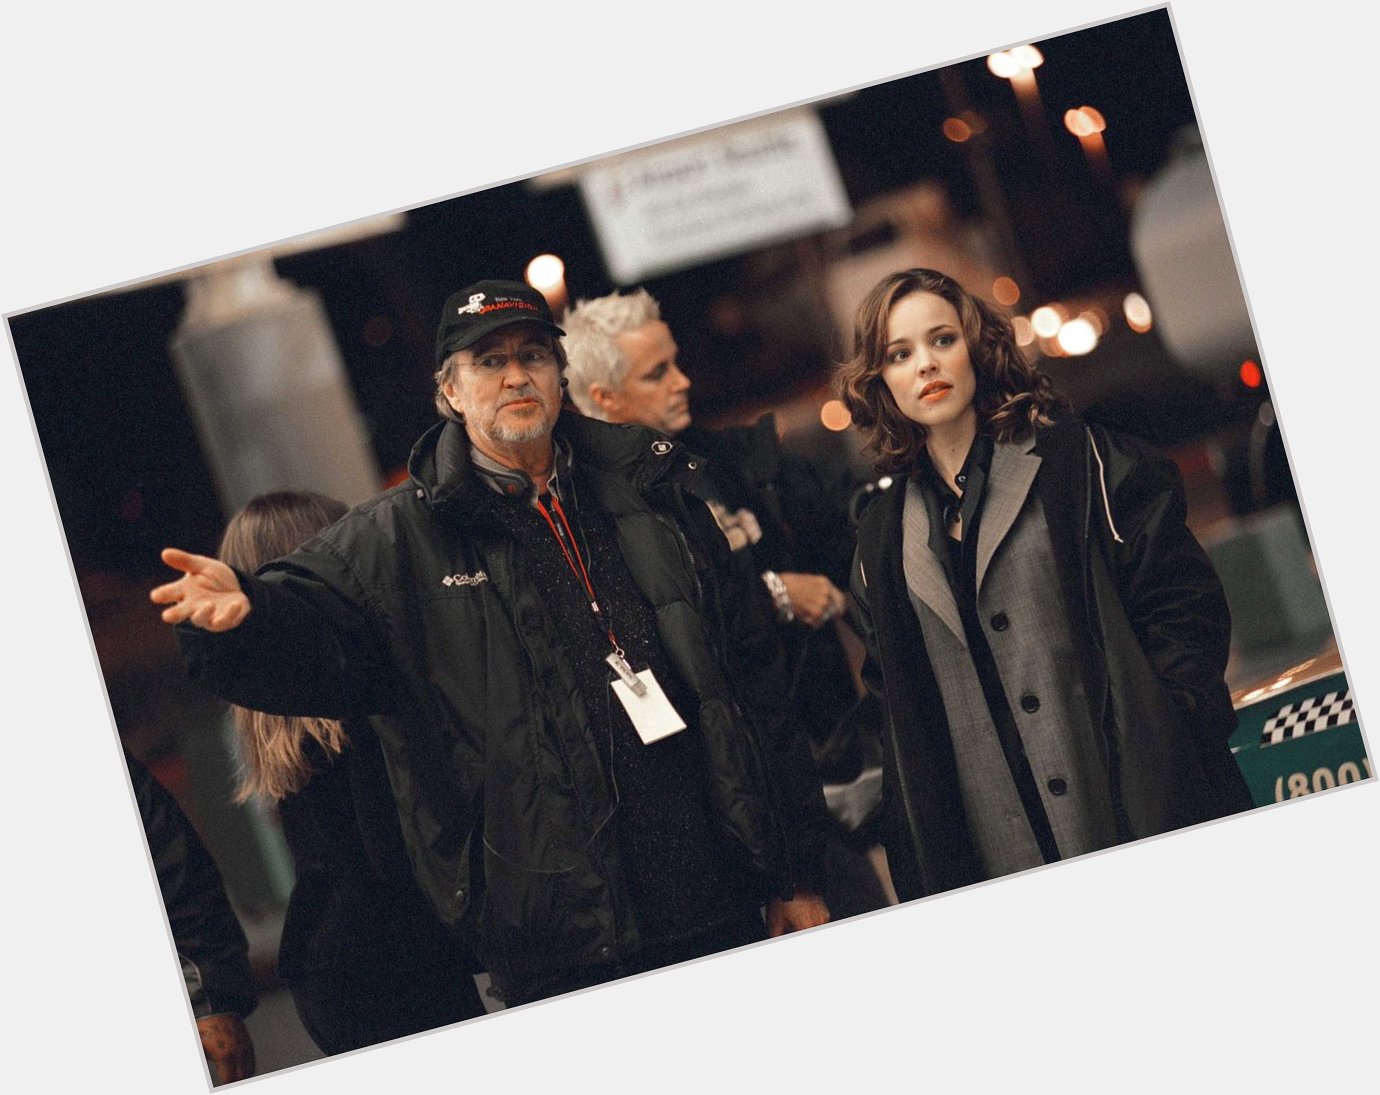 Rachel mcadams on the set of red eye with director wes craven (2005)
happy birthday, wes! 